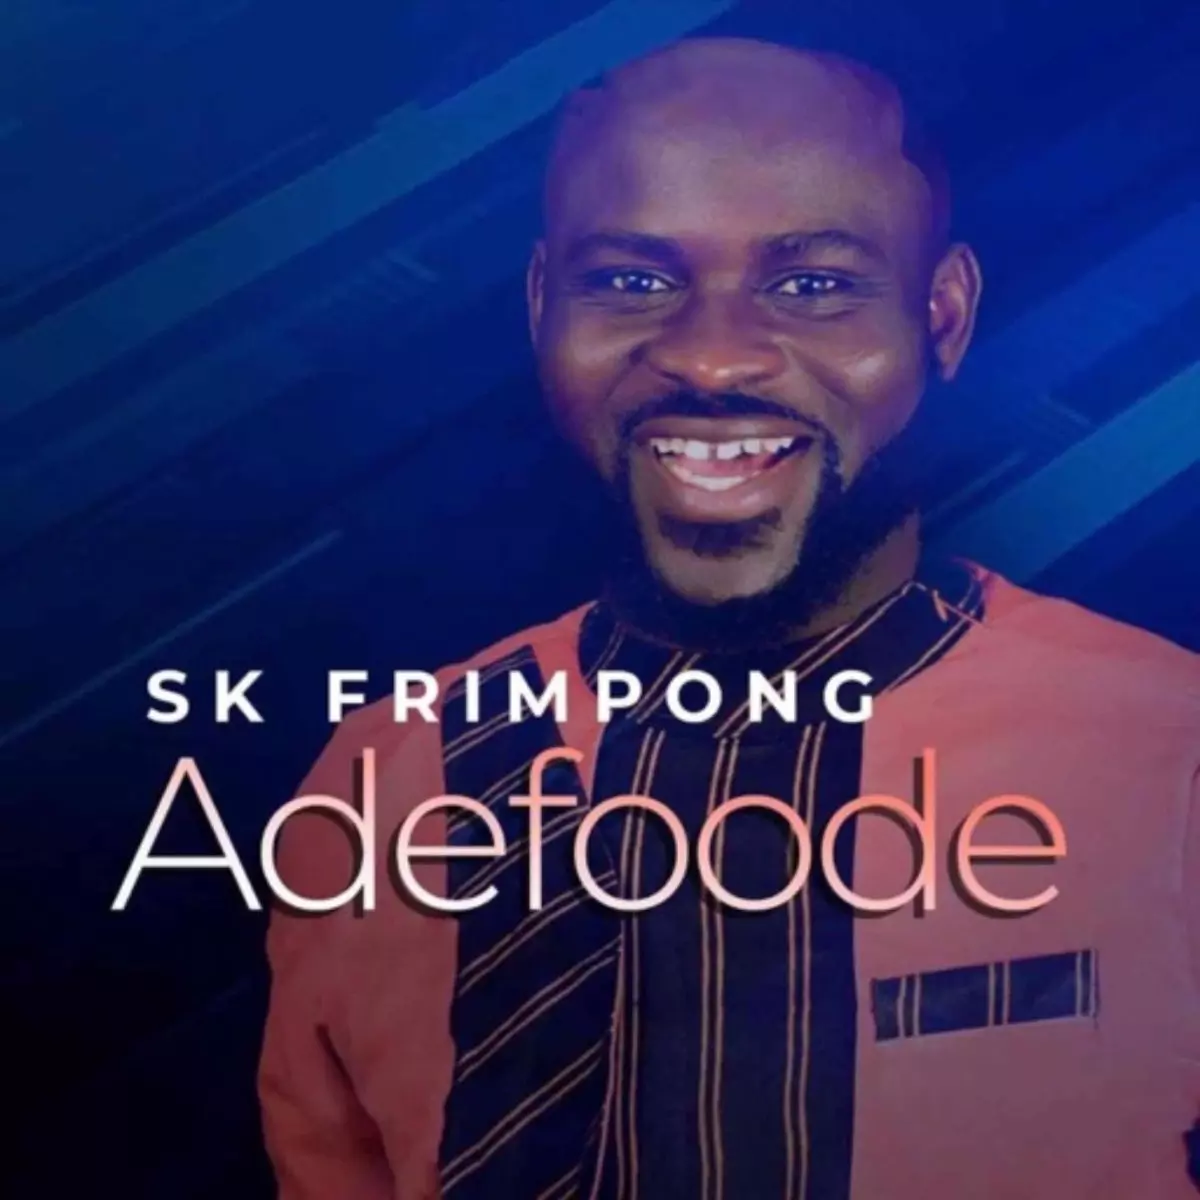 Adefoode - Single by SK Frimpong on Apple Music